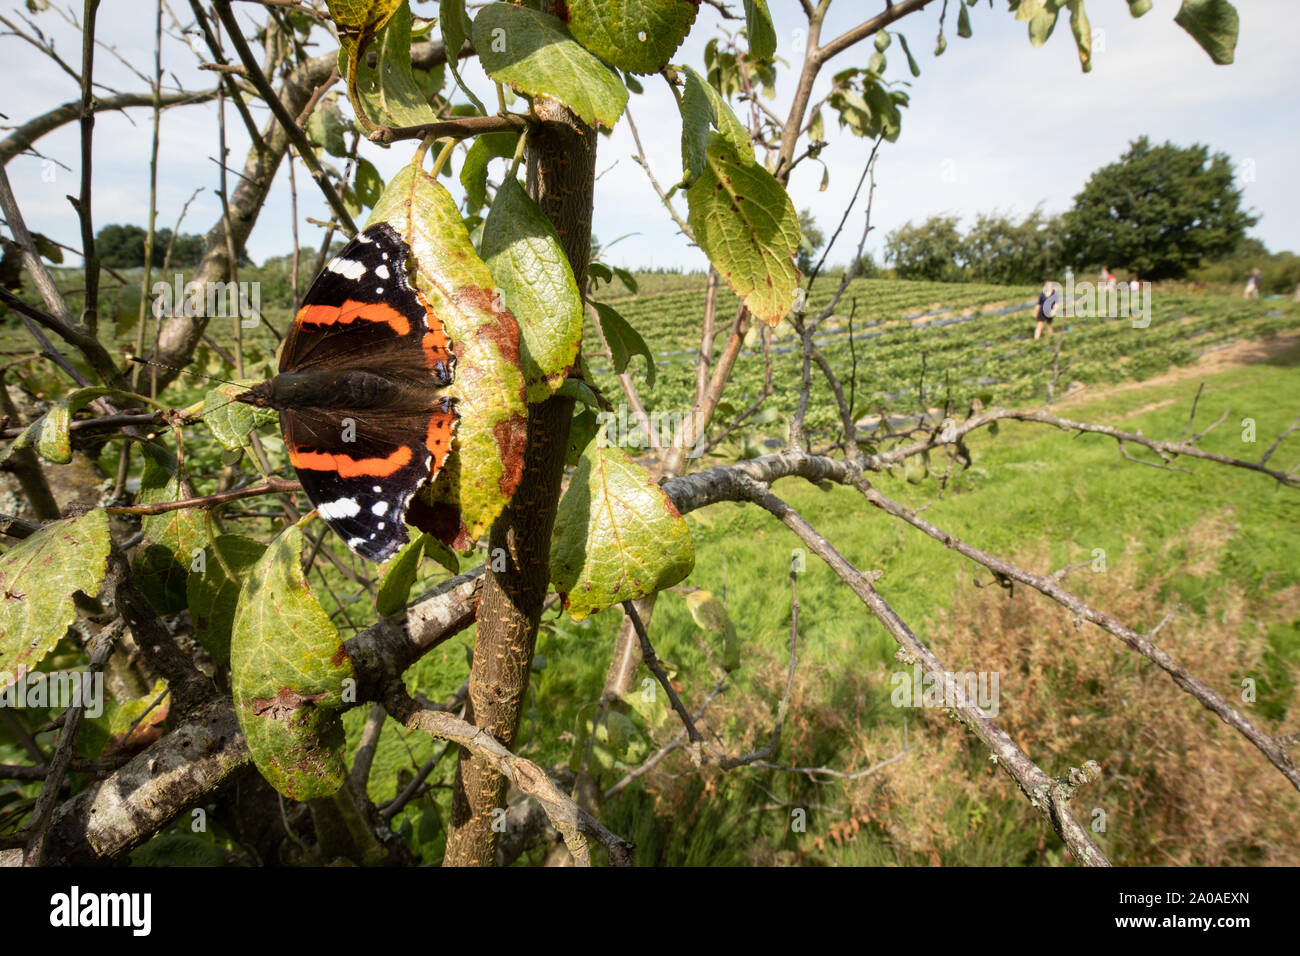 Red admiral butterfly sunning itself on a fruit tree with people wandering in the fields behind it. A late summer scene in rural Kent, England. Stock Photo